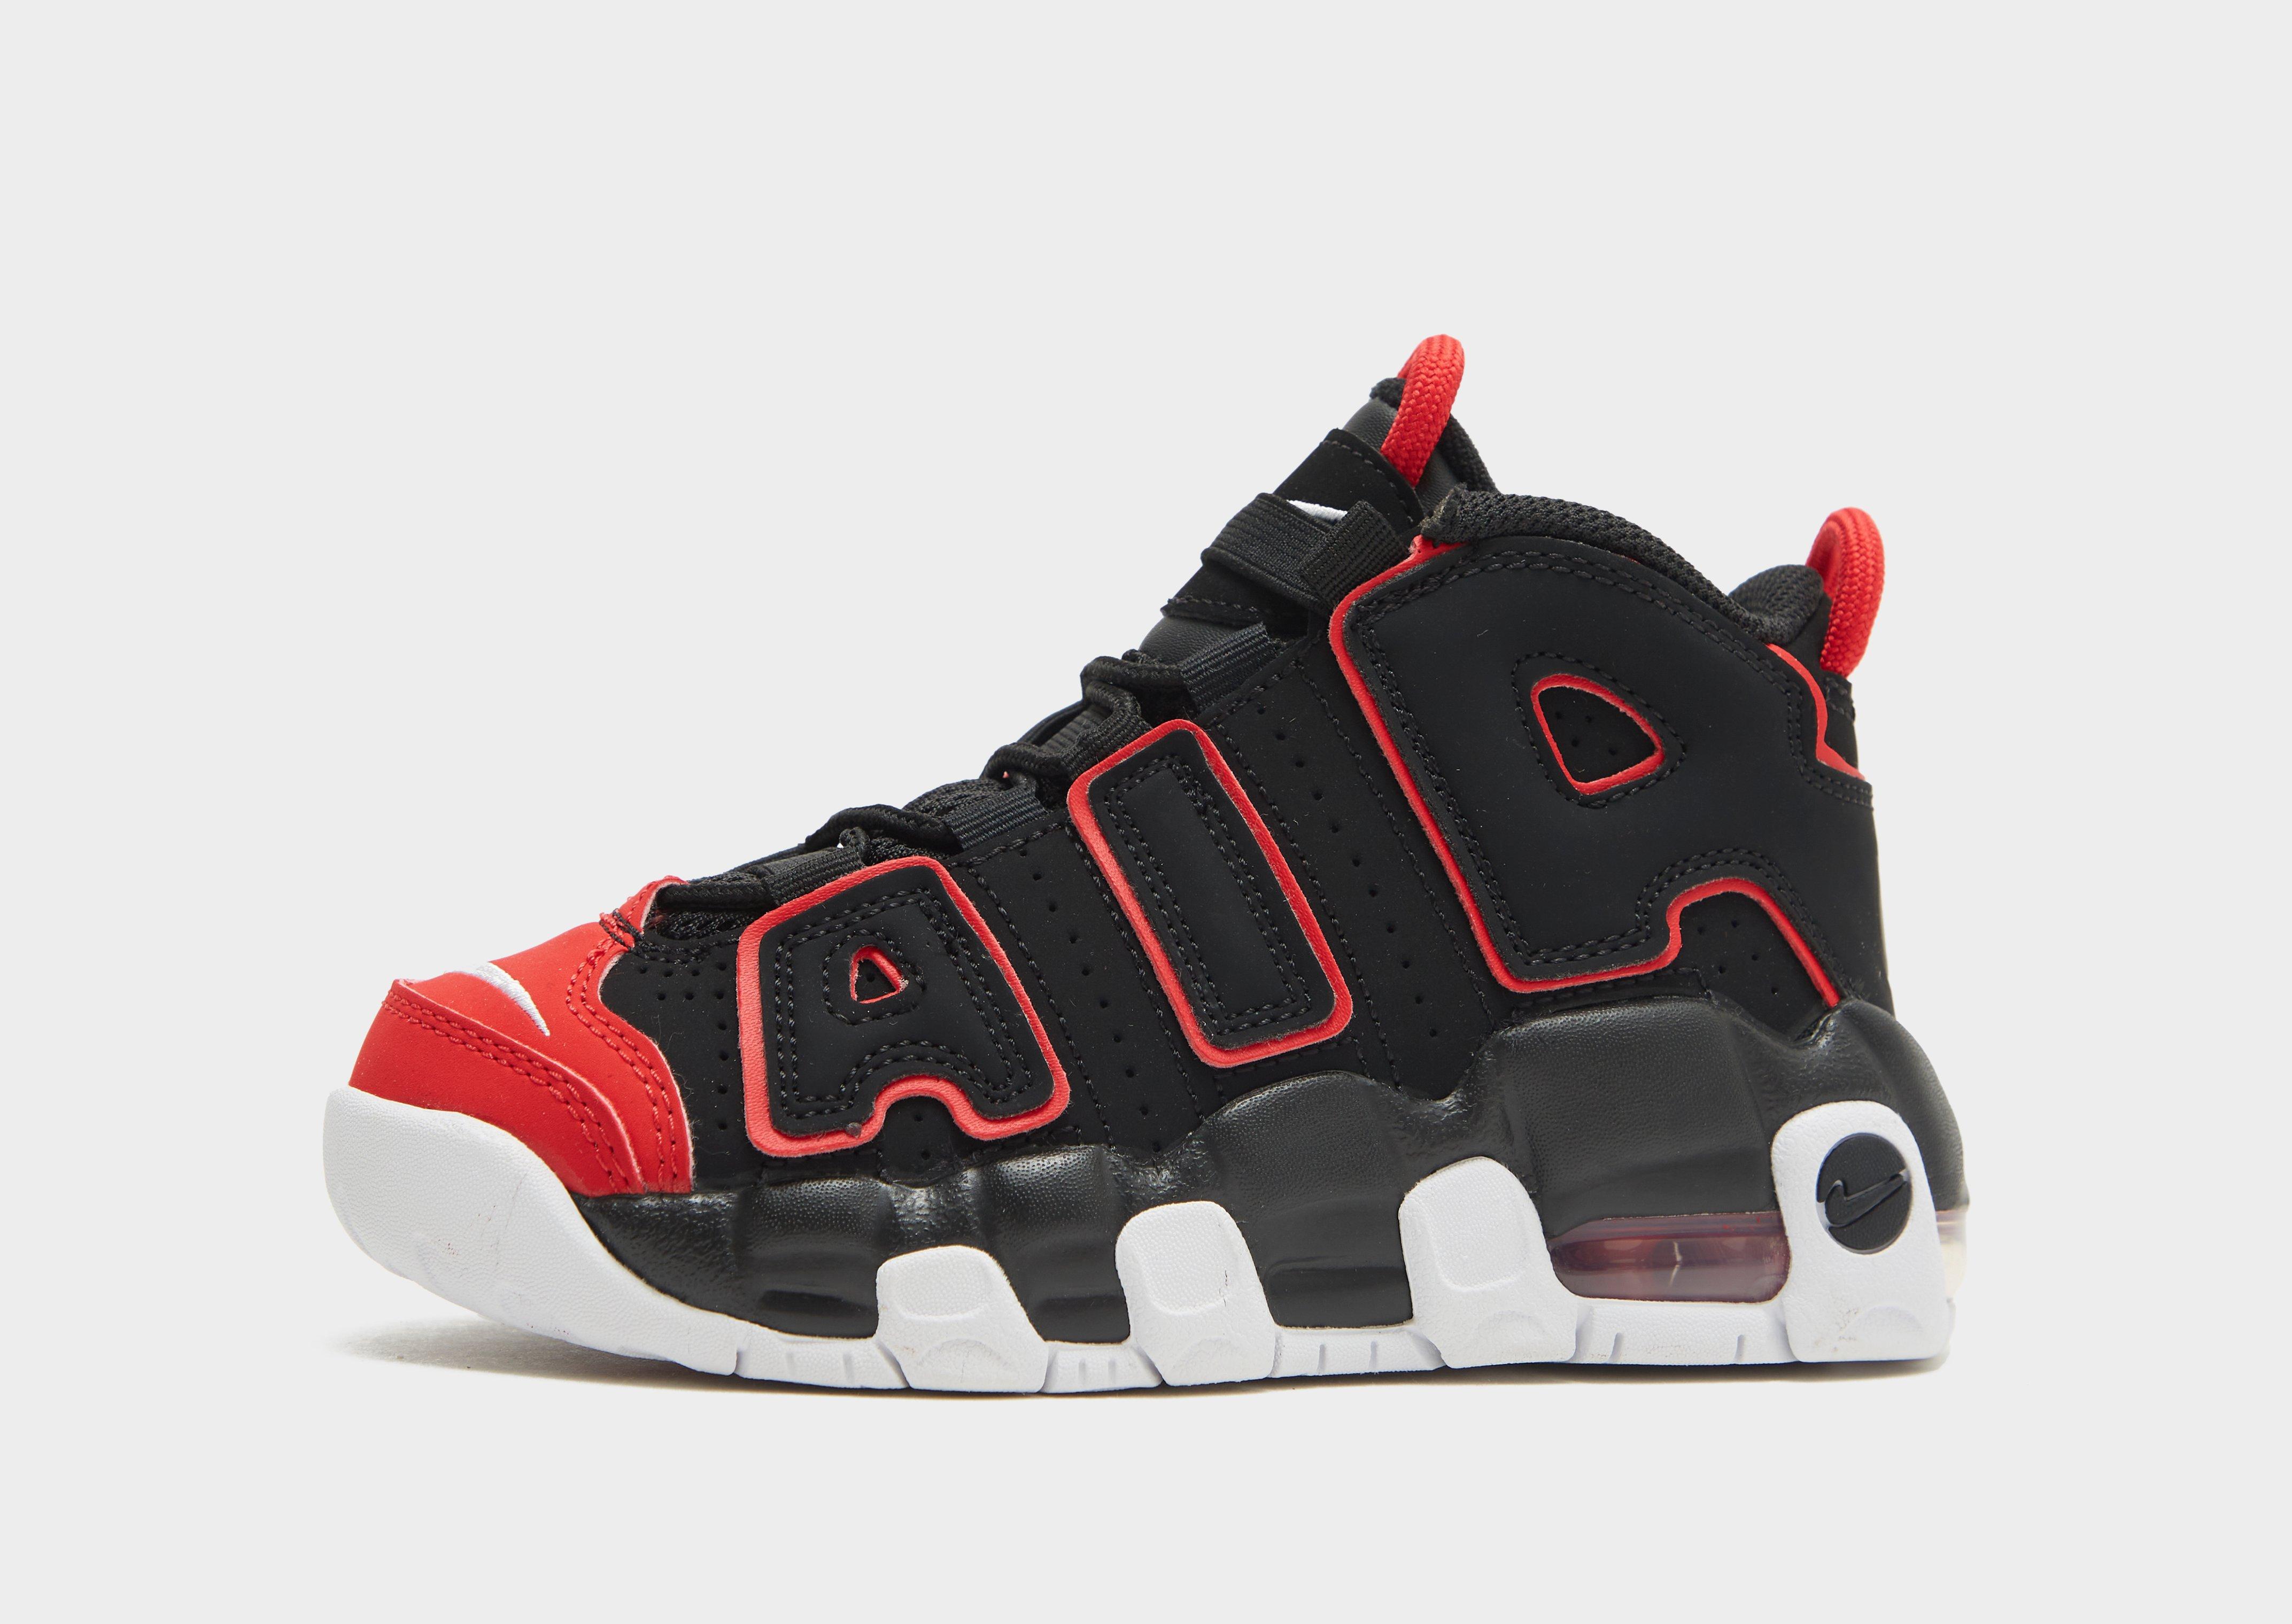 when did the nike air more uptempo come out